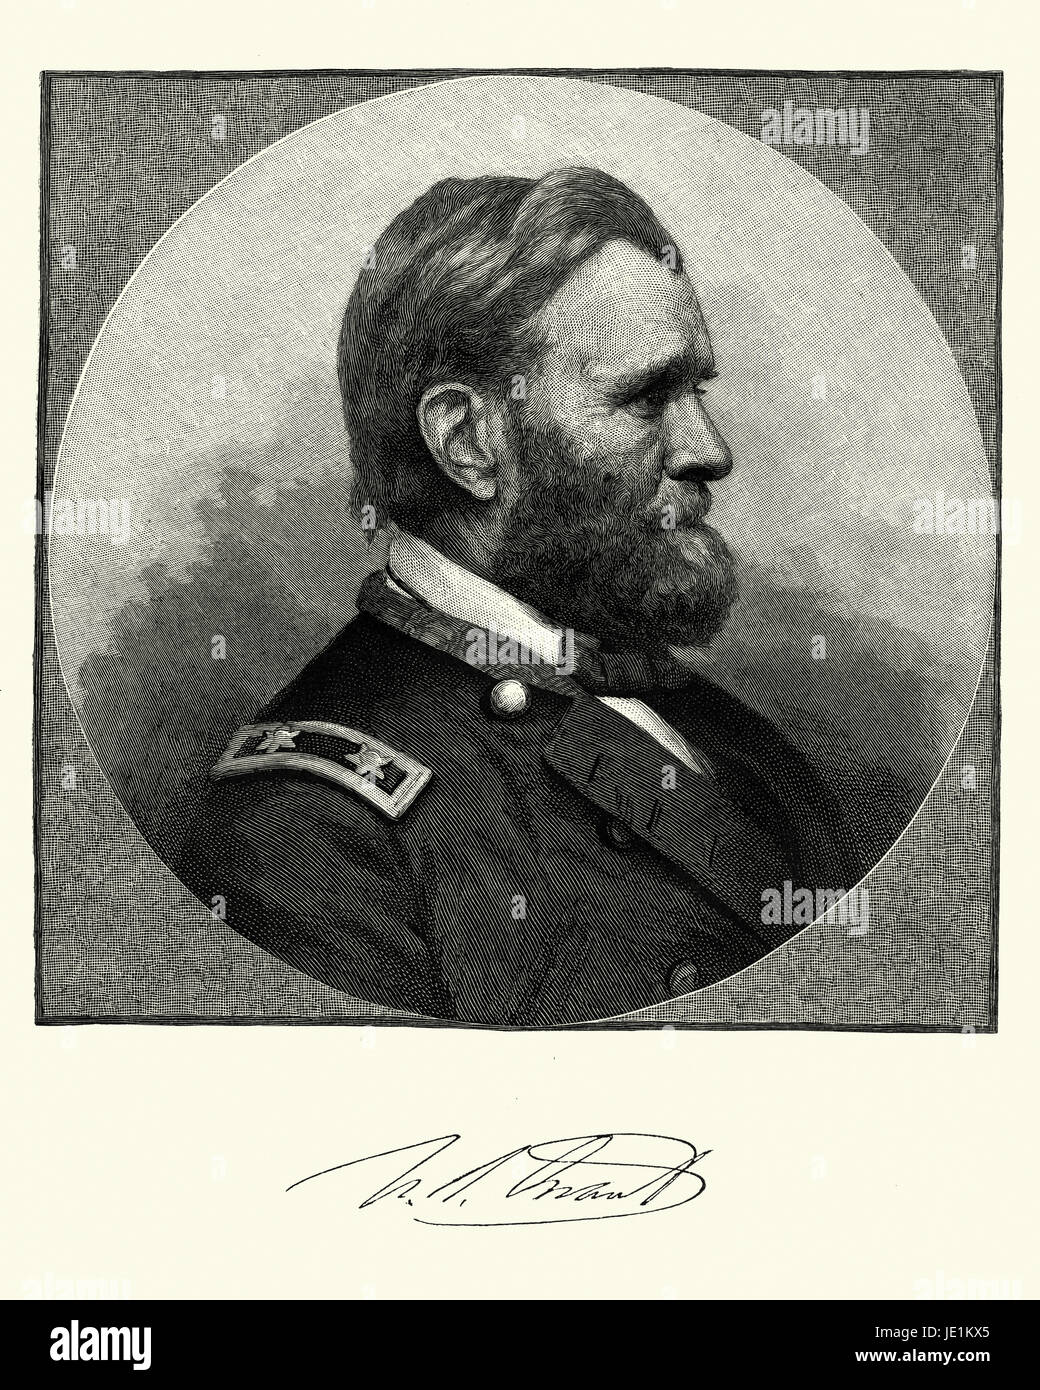 Vintage engraving of Ulysses S. Grant the 18th President of the United States (1869–77). As Commanding General (1864–69), Grant worked closely with President Abraham Lincoln to lead the Union Army to victory over the Confederacy in the American Civil War. Stock Photo